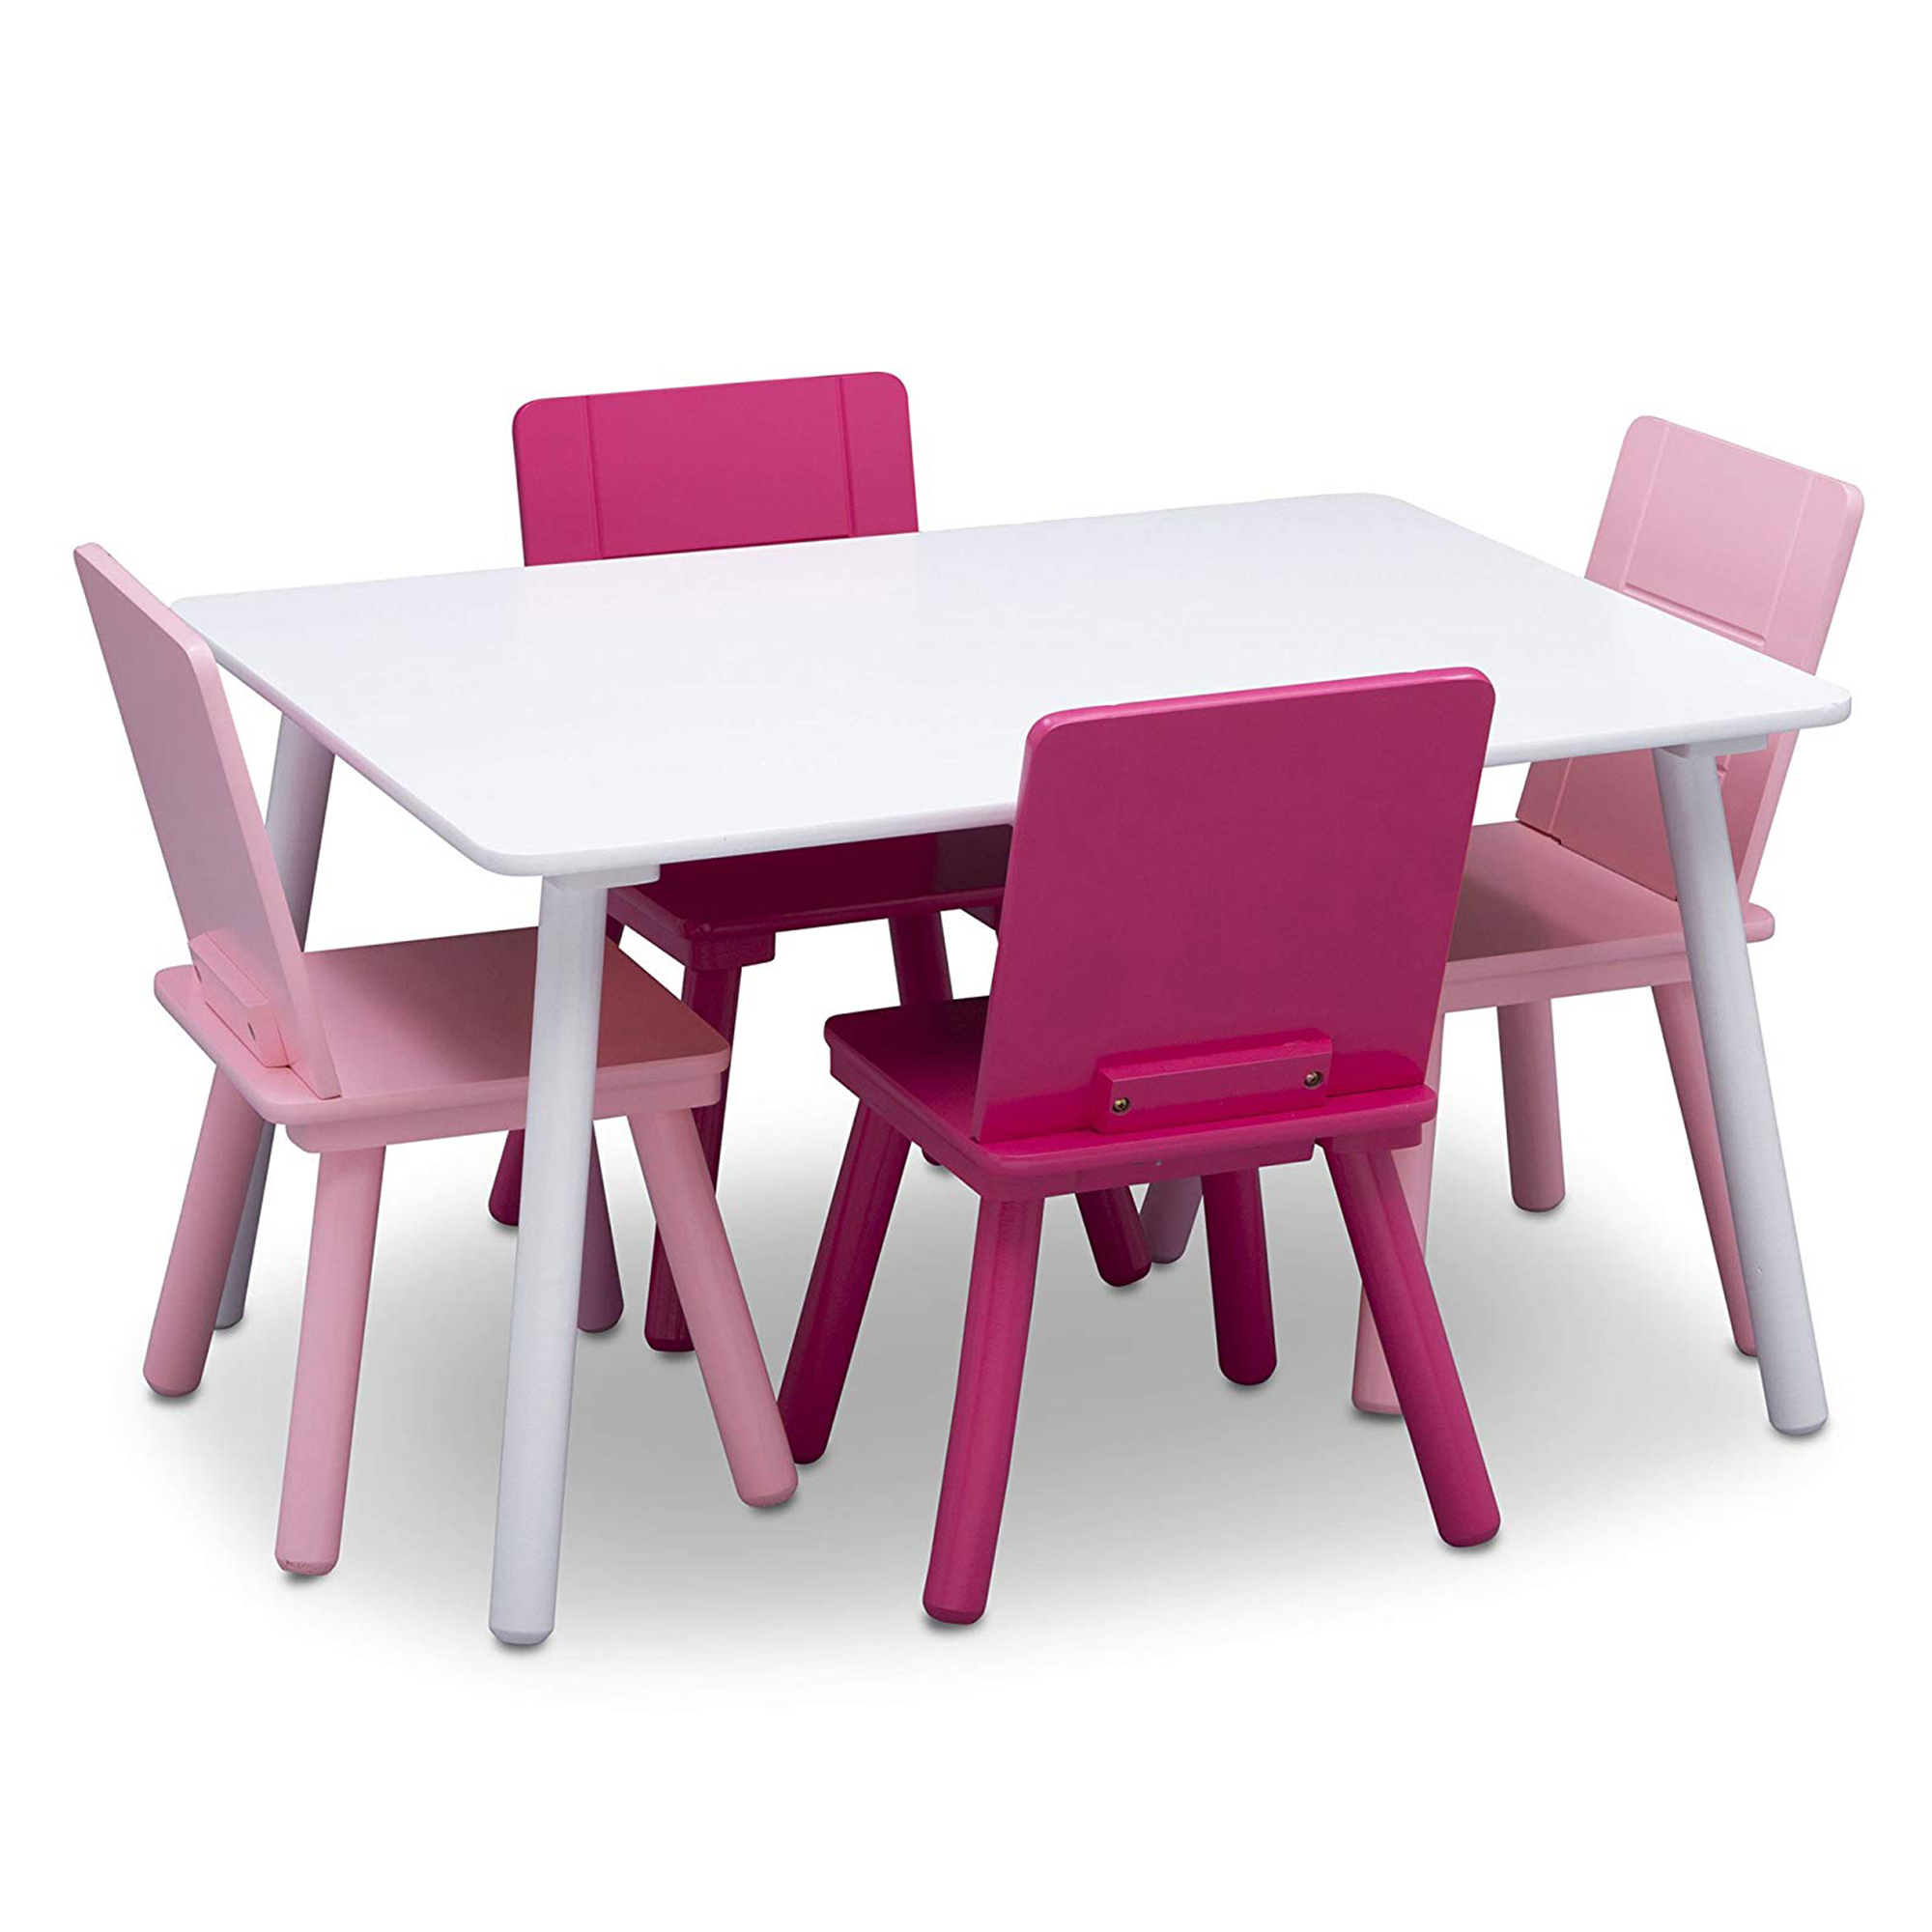 Delta Children Wooden Activity Table and 4 Chair Set, White & Pink ...